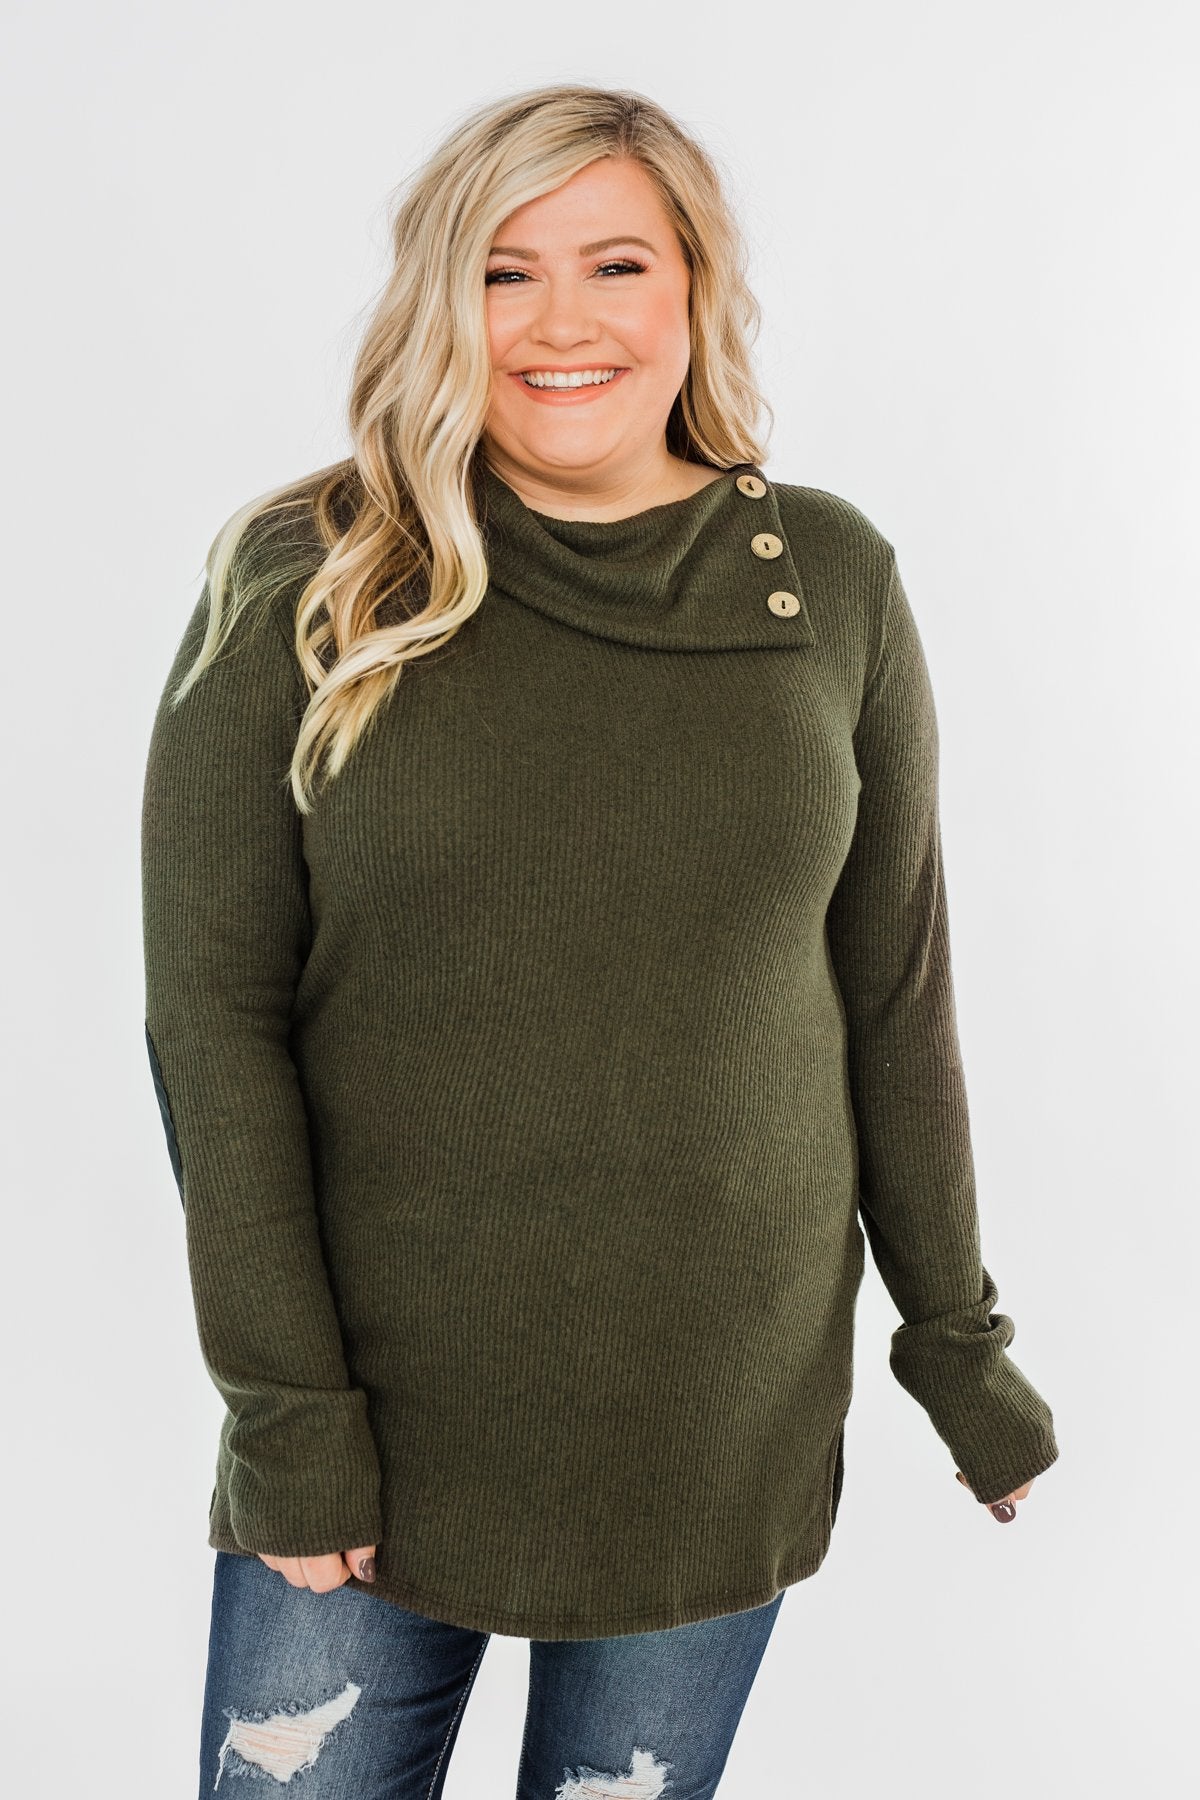 Moments Like This Knit Button Top- Dark Olive